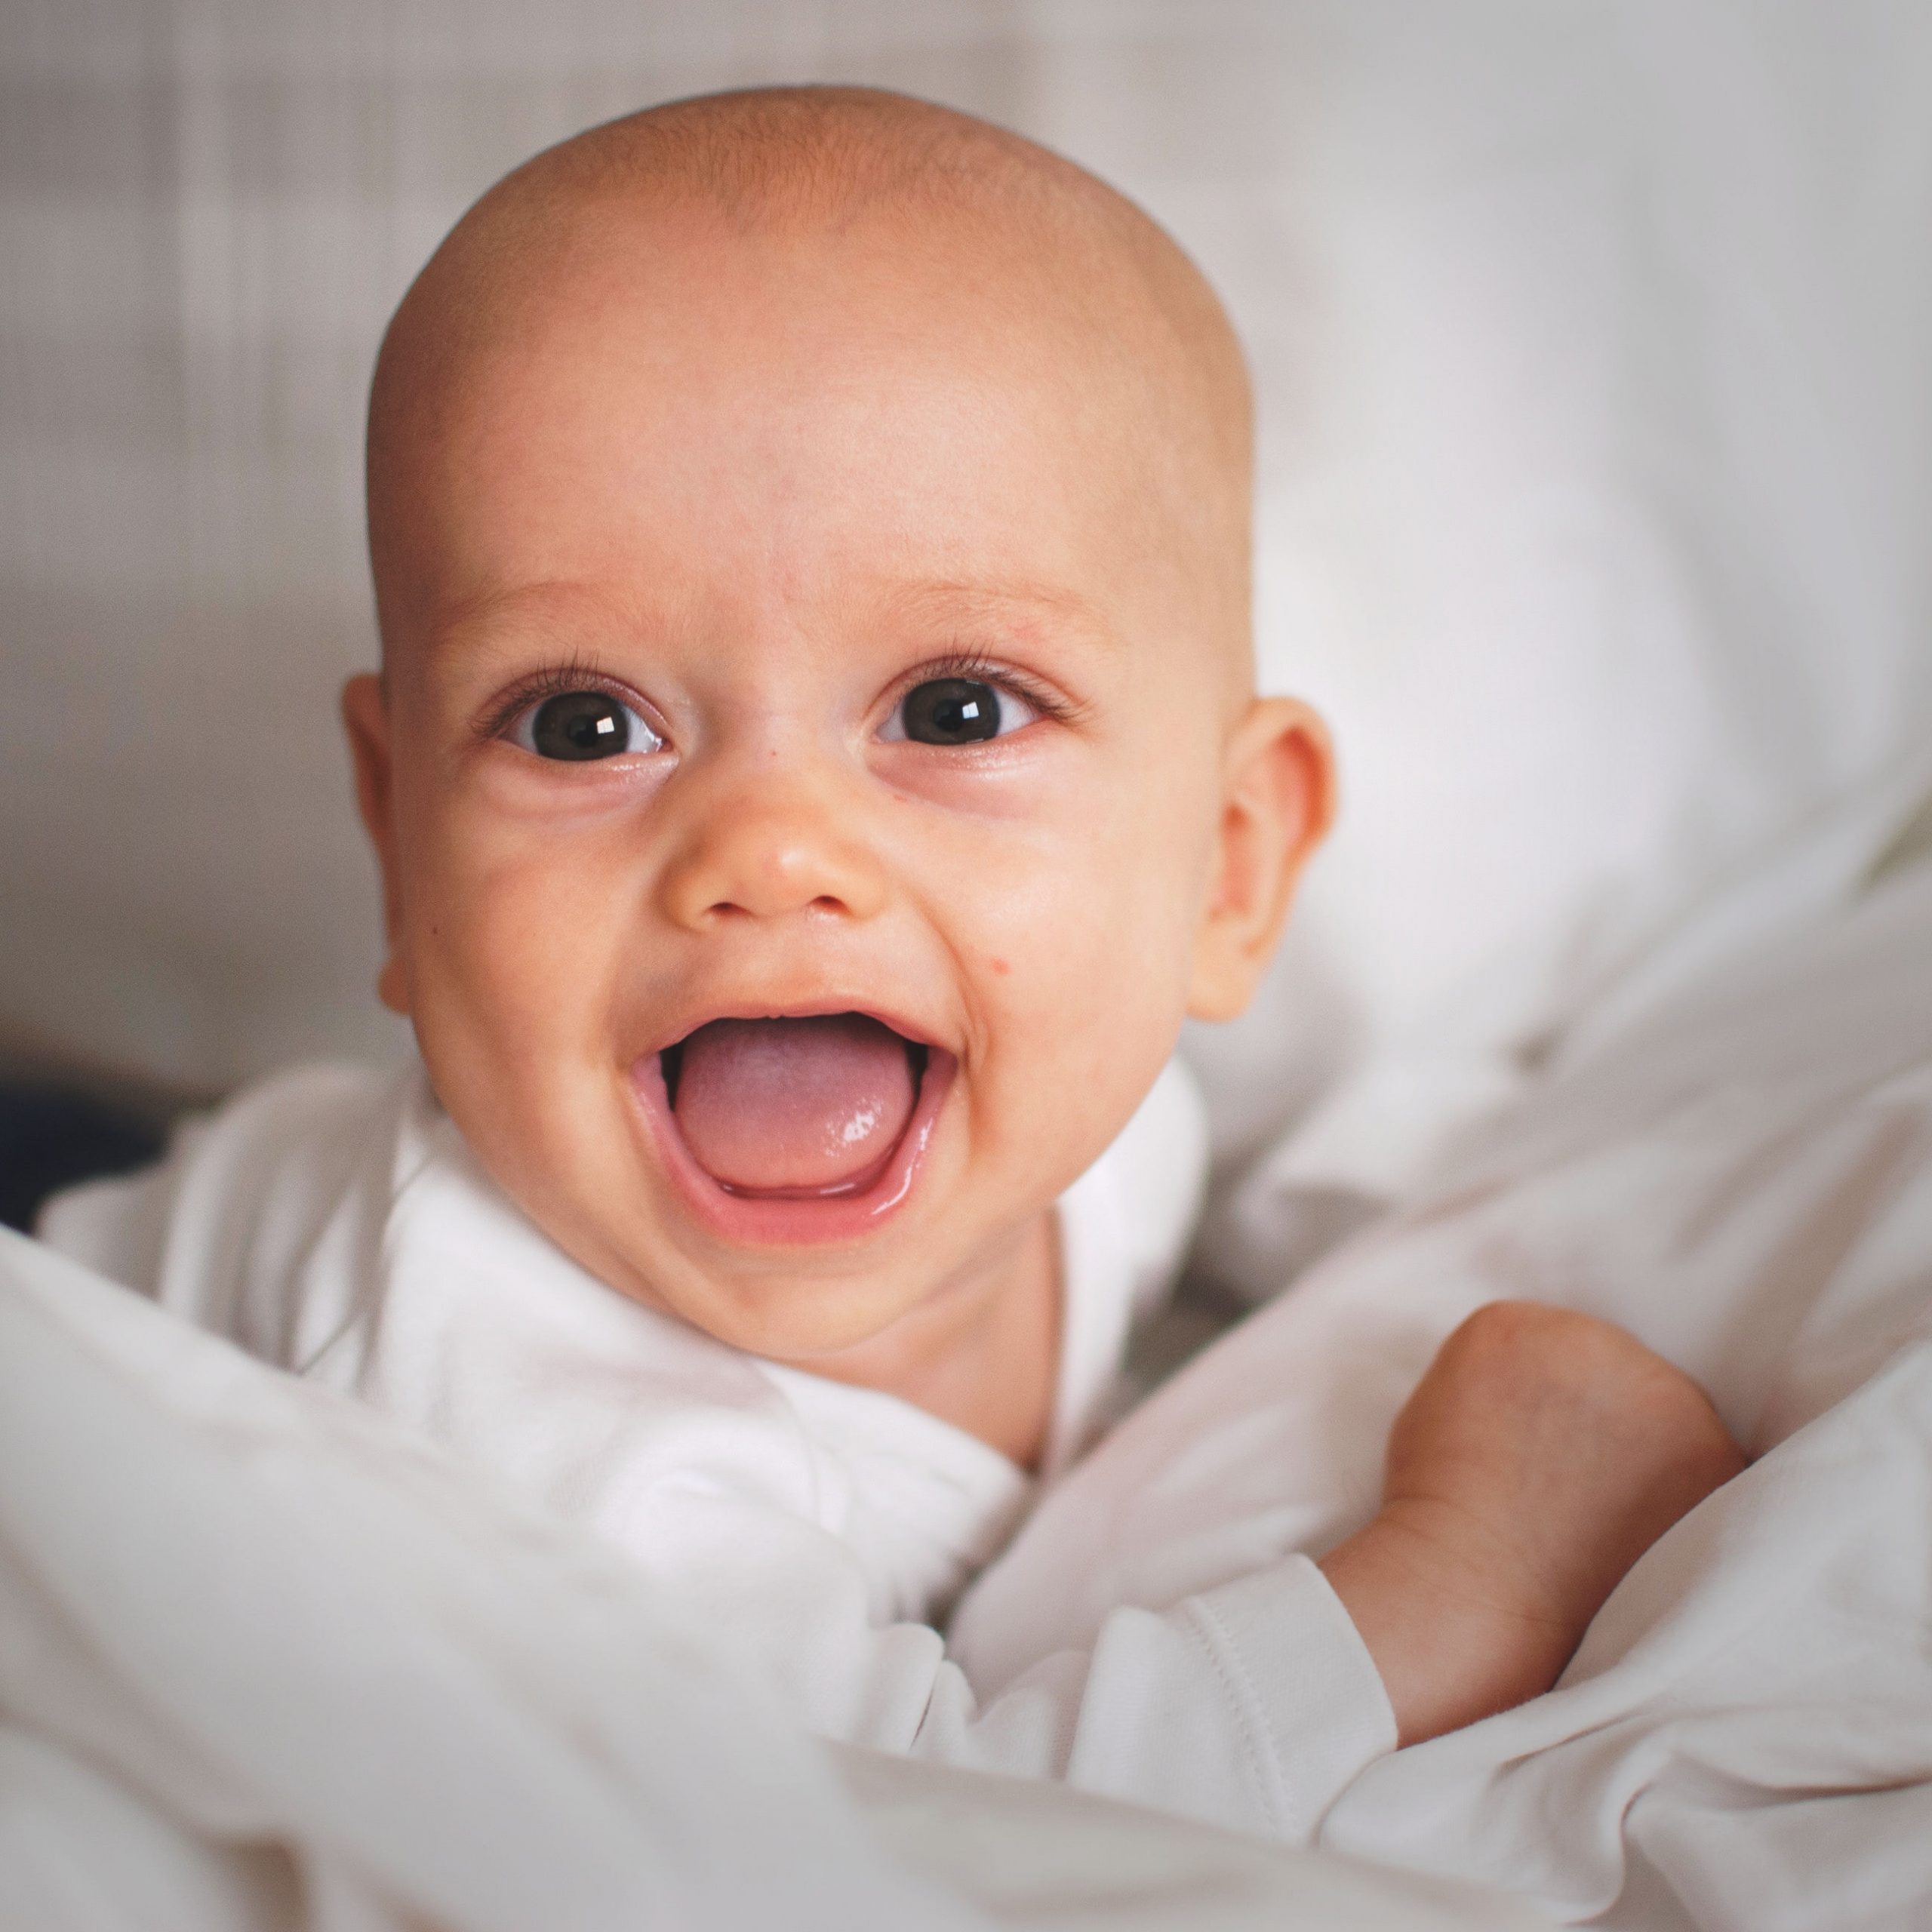 Can a baby develop reflux at 4 months?